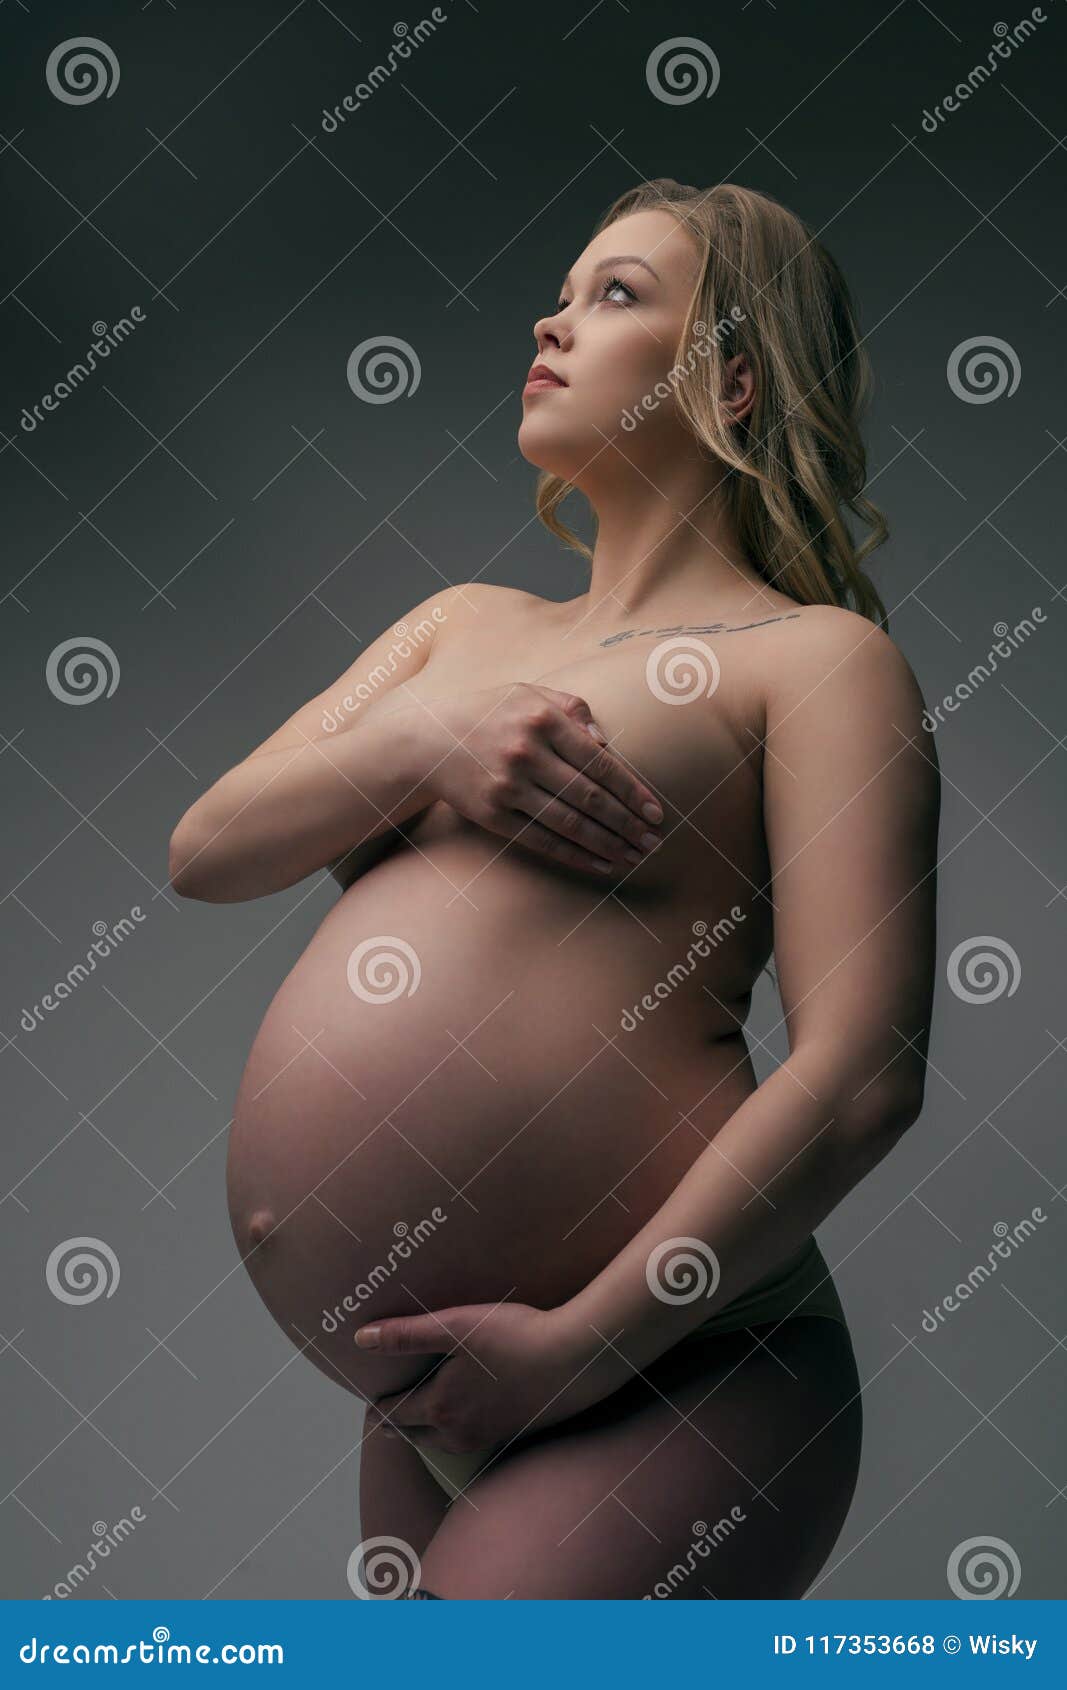 Pregnant nude girl blonde